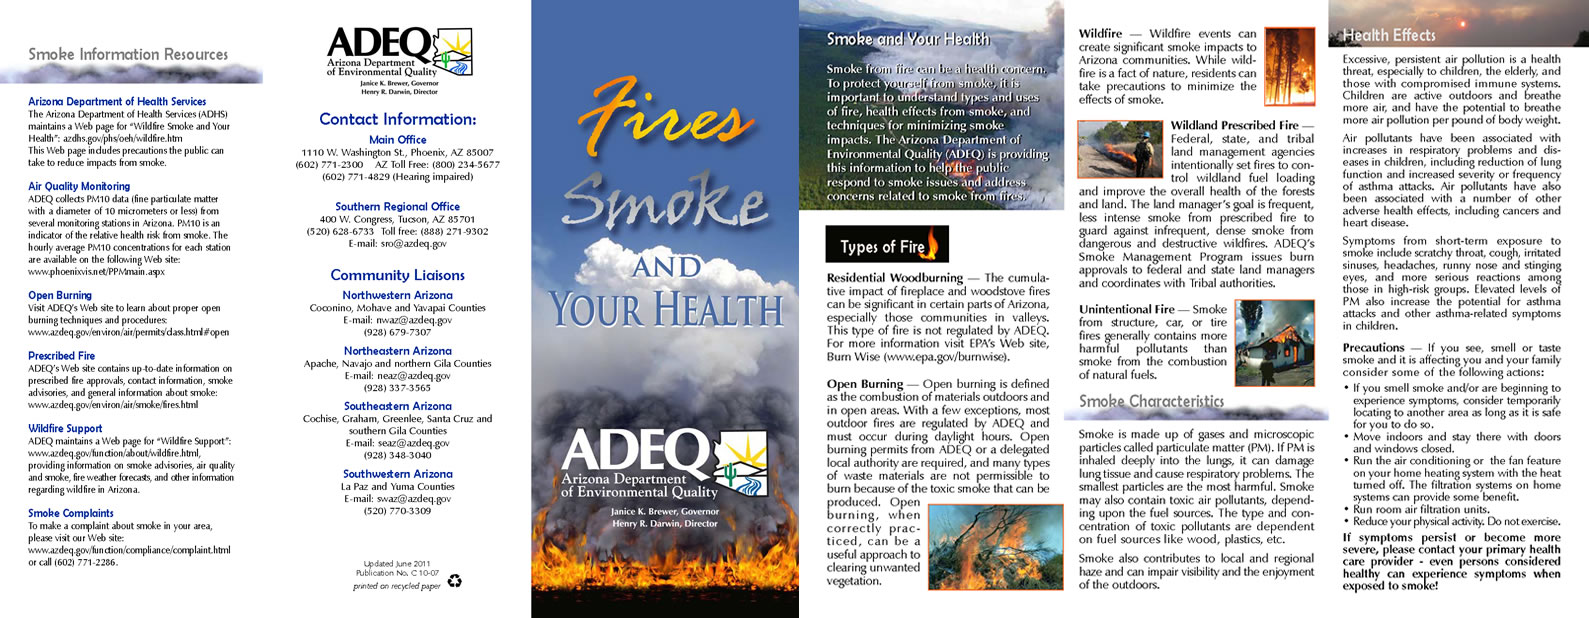 Fires Smoke and Your Health Brochure